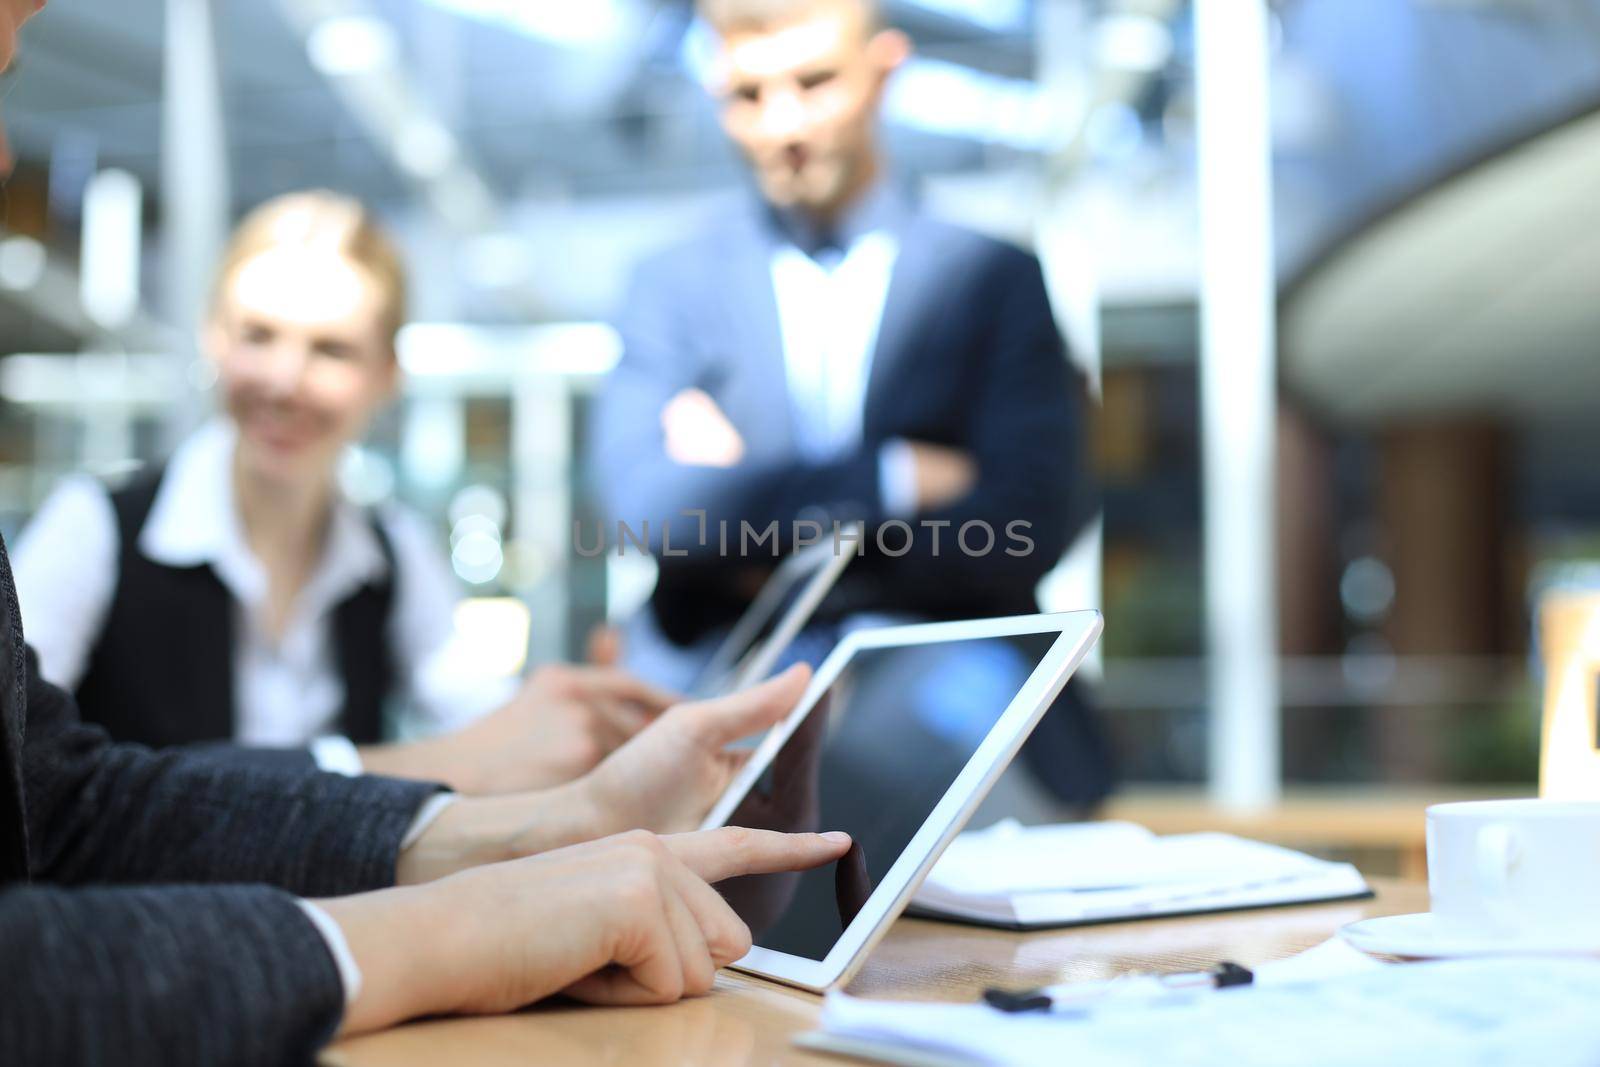 Image of human hand pointing at touchscreen in working environment at meeting